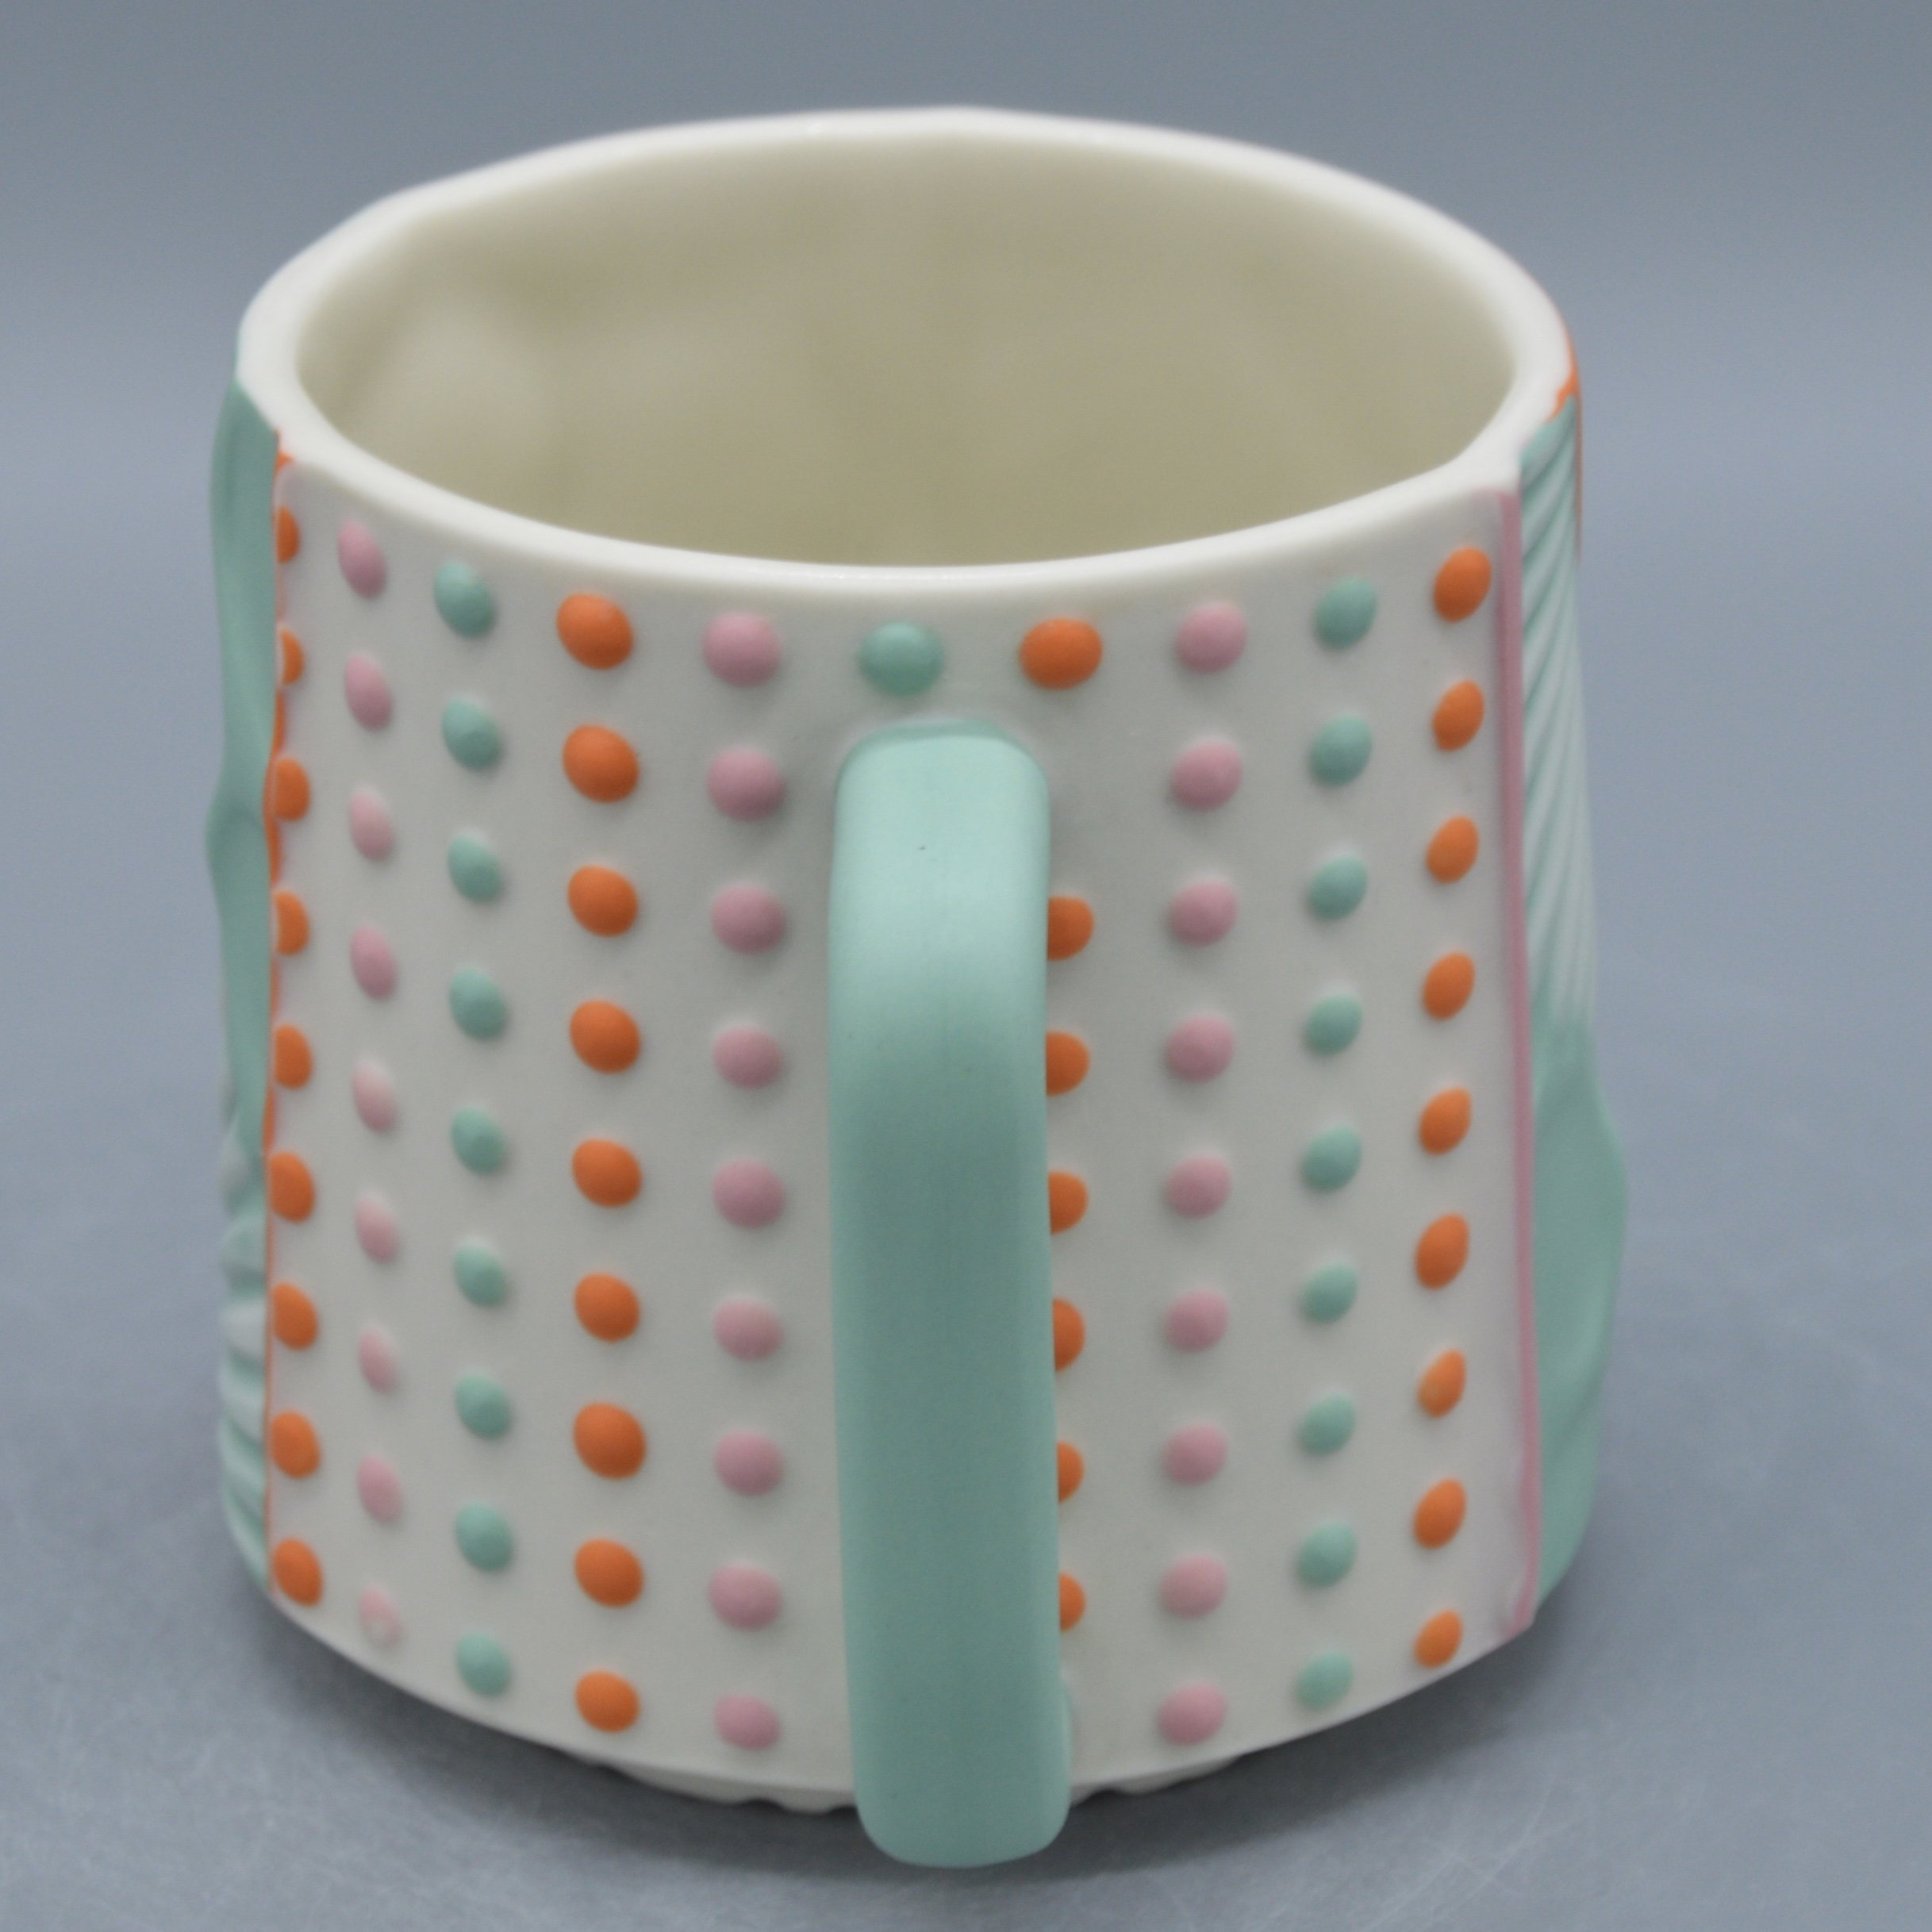 Dots in Orange, Turquoise, Pink